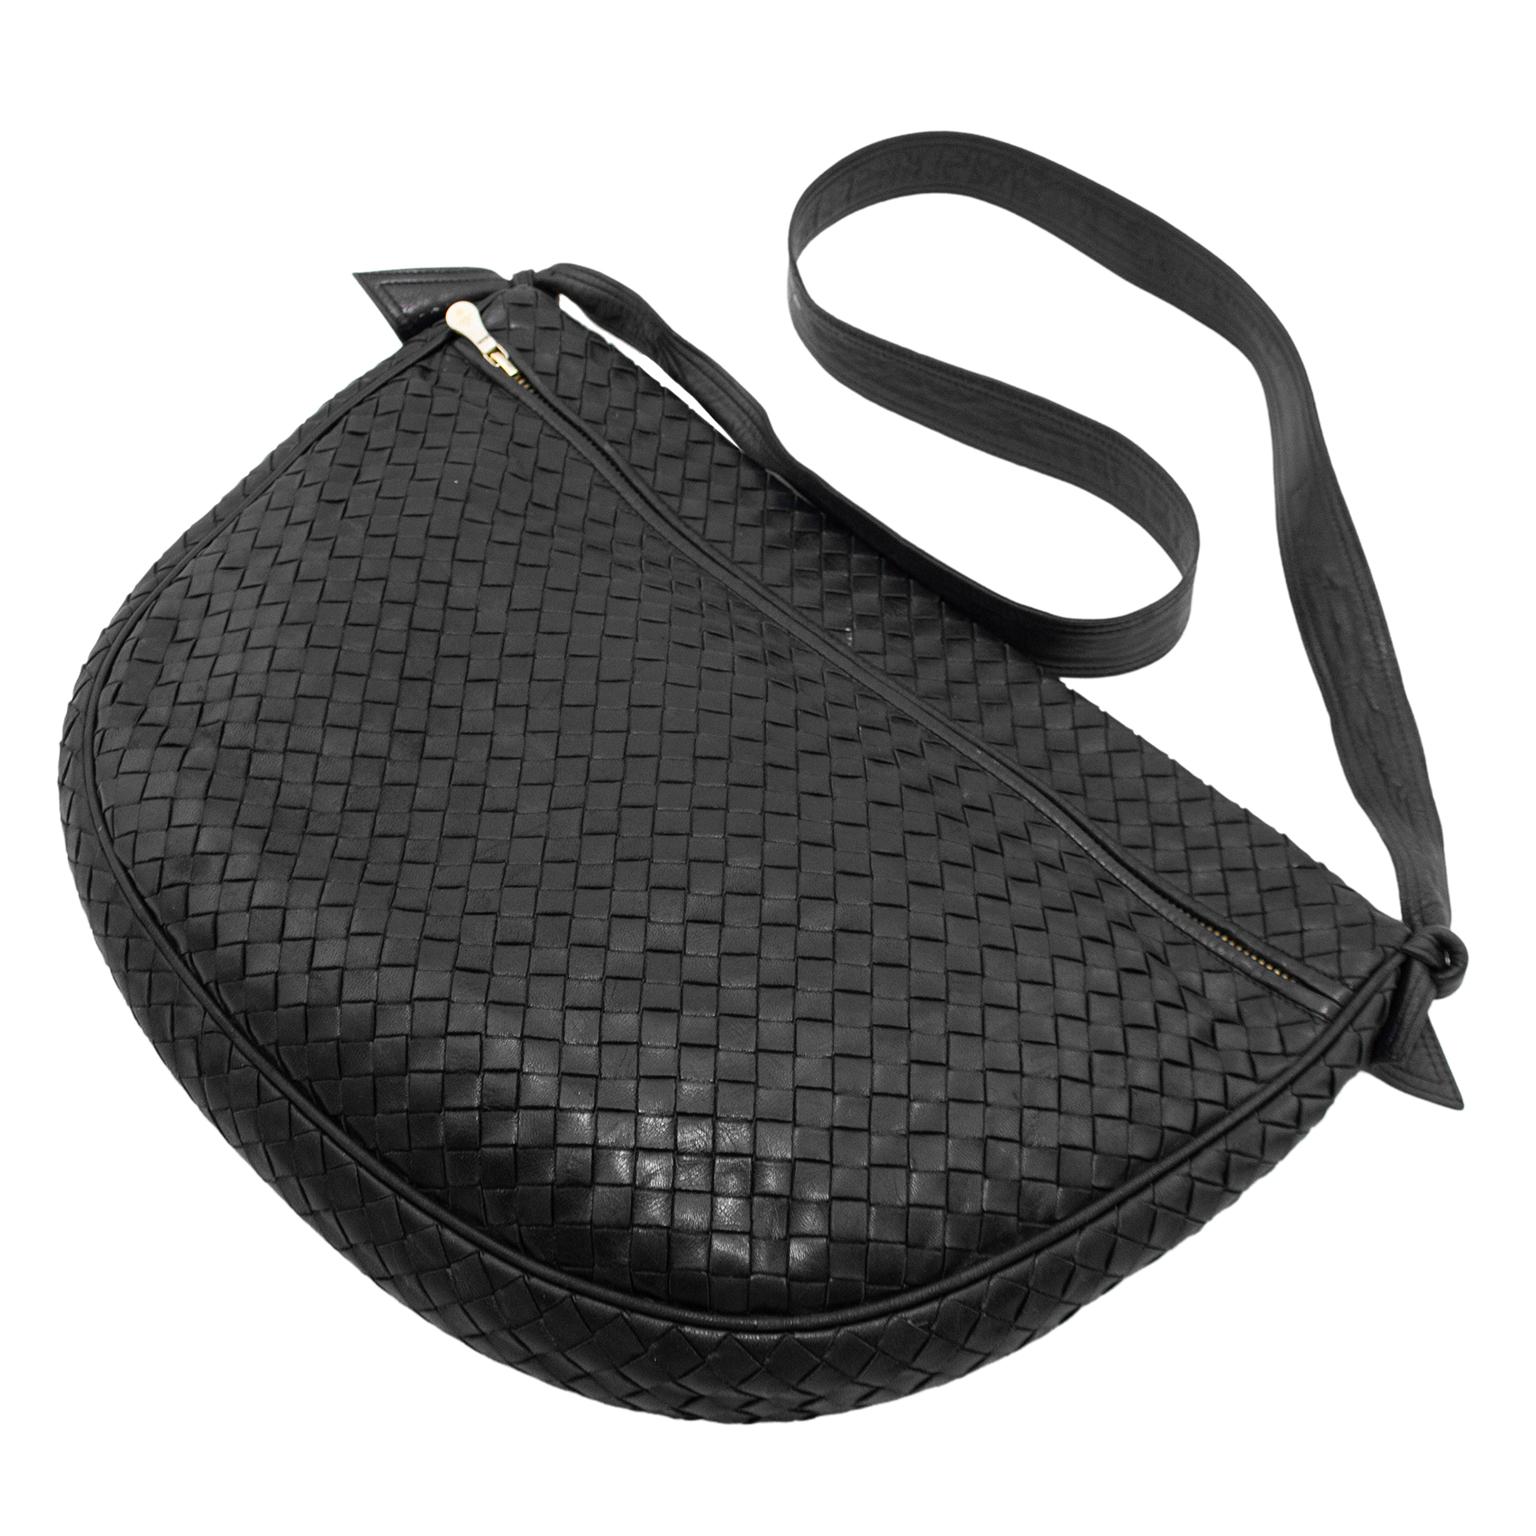 A 1990s Bottega Veneta classic that is the inspiration for the newest Bottega Veneta collections. Black intrecciato leather unstructured hobo style bag. Two top zippers that open into large compartments, one lined in beige suede and the other in